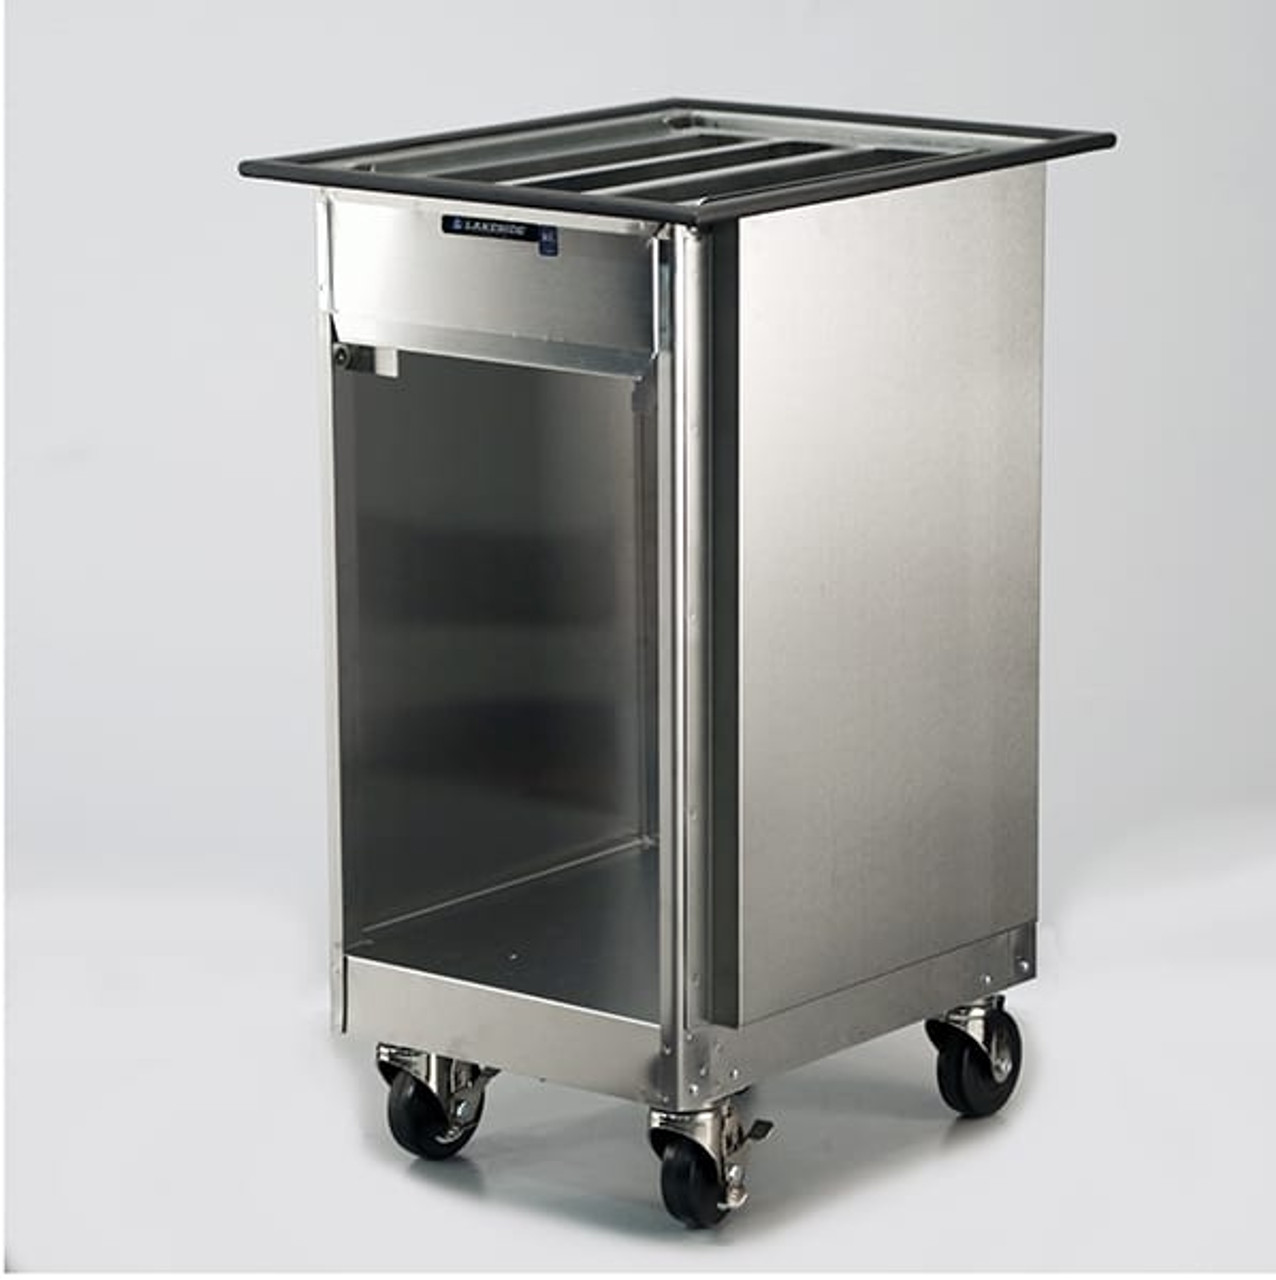 Tray Dispenser, cabinet style, open base, mobile, single self-leveling tray platform, for 14" x 18" or 15" x 20" trays, stainless steel construction, 4" swivel casters (2) with brakes, NSF, Made in USA